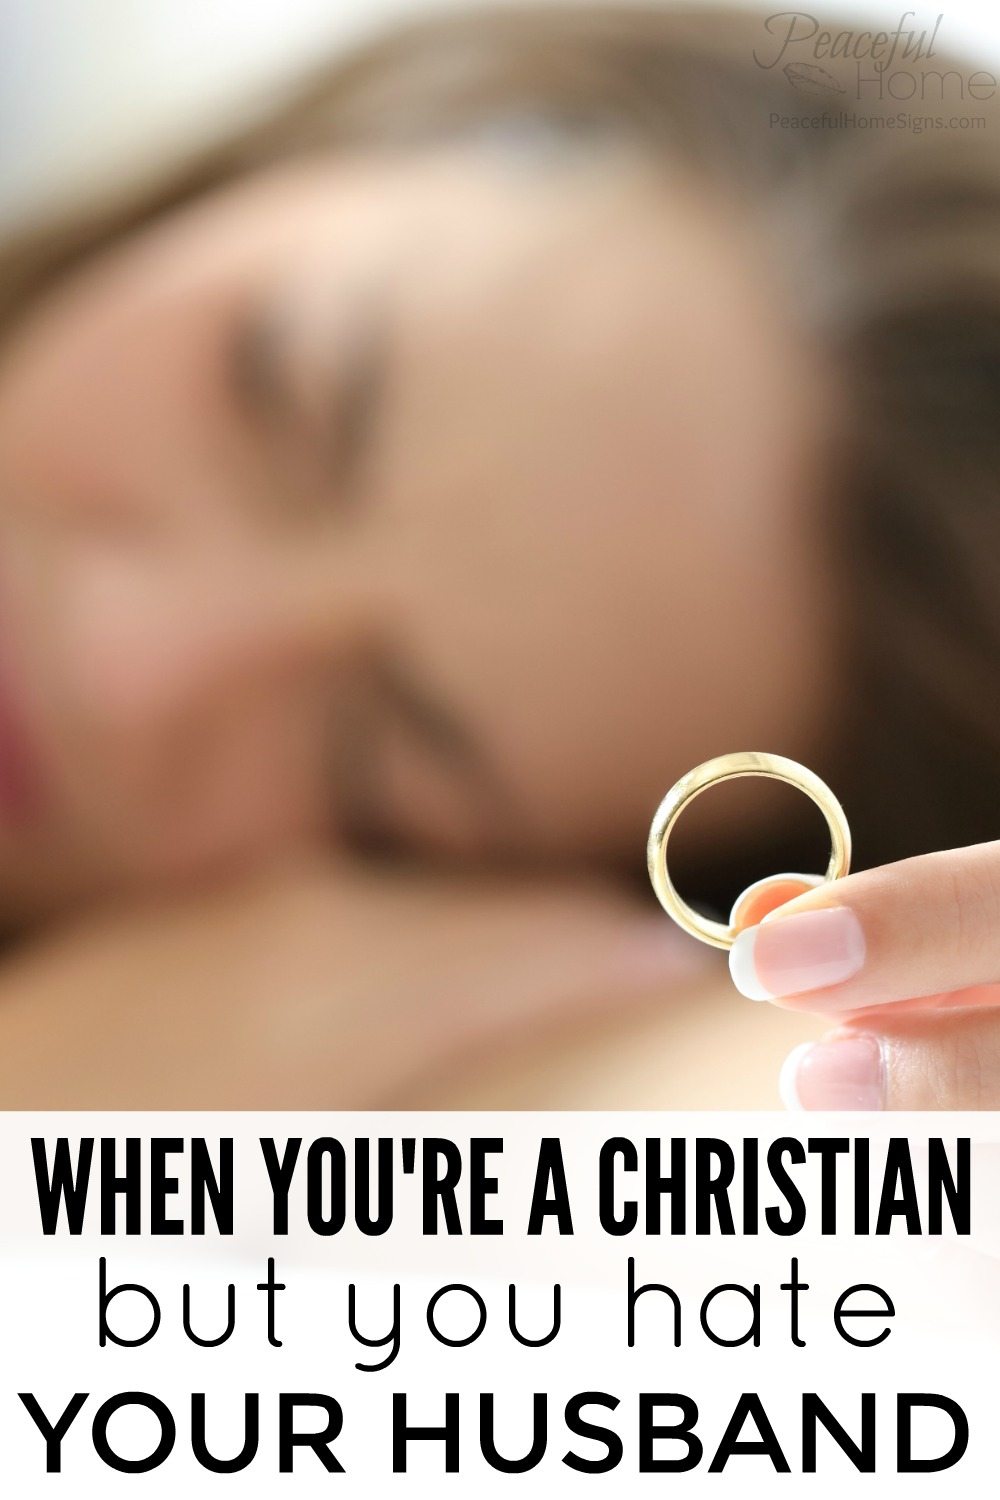 Christian marriage | faith based marriage | God Centered marriage | How to respect my husband | honor your husband, marriage help | when you're a christian but you hate your husband | Ephesians 5 Wives 